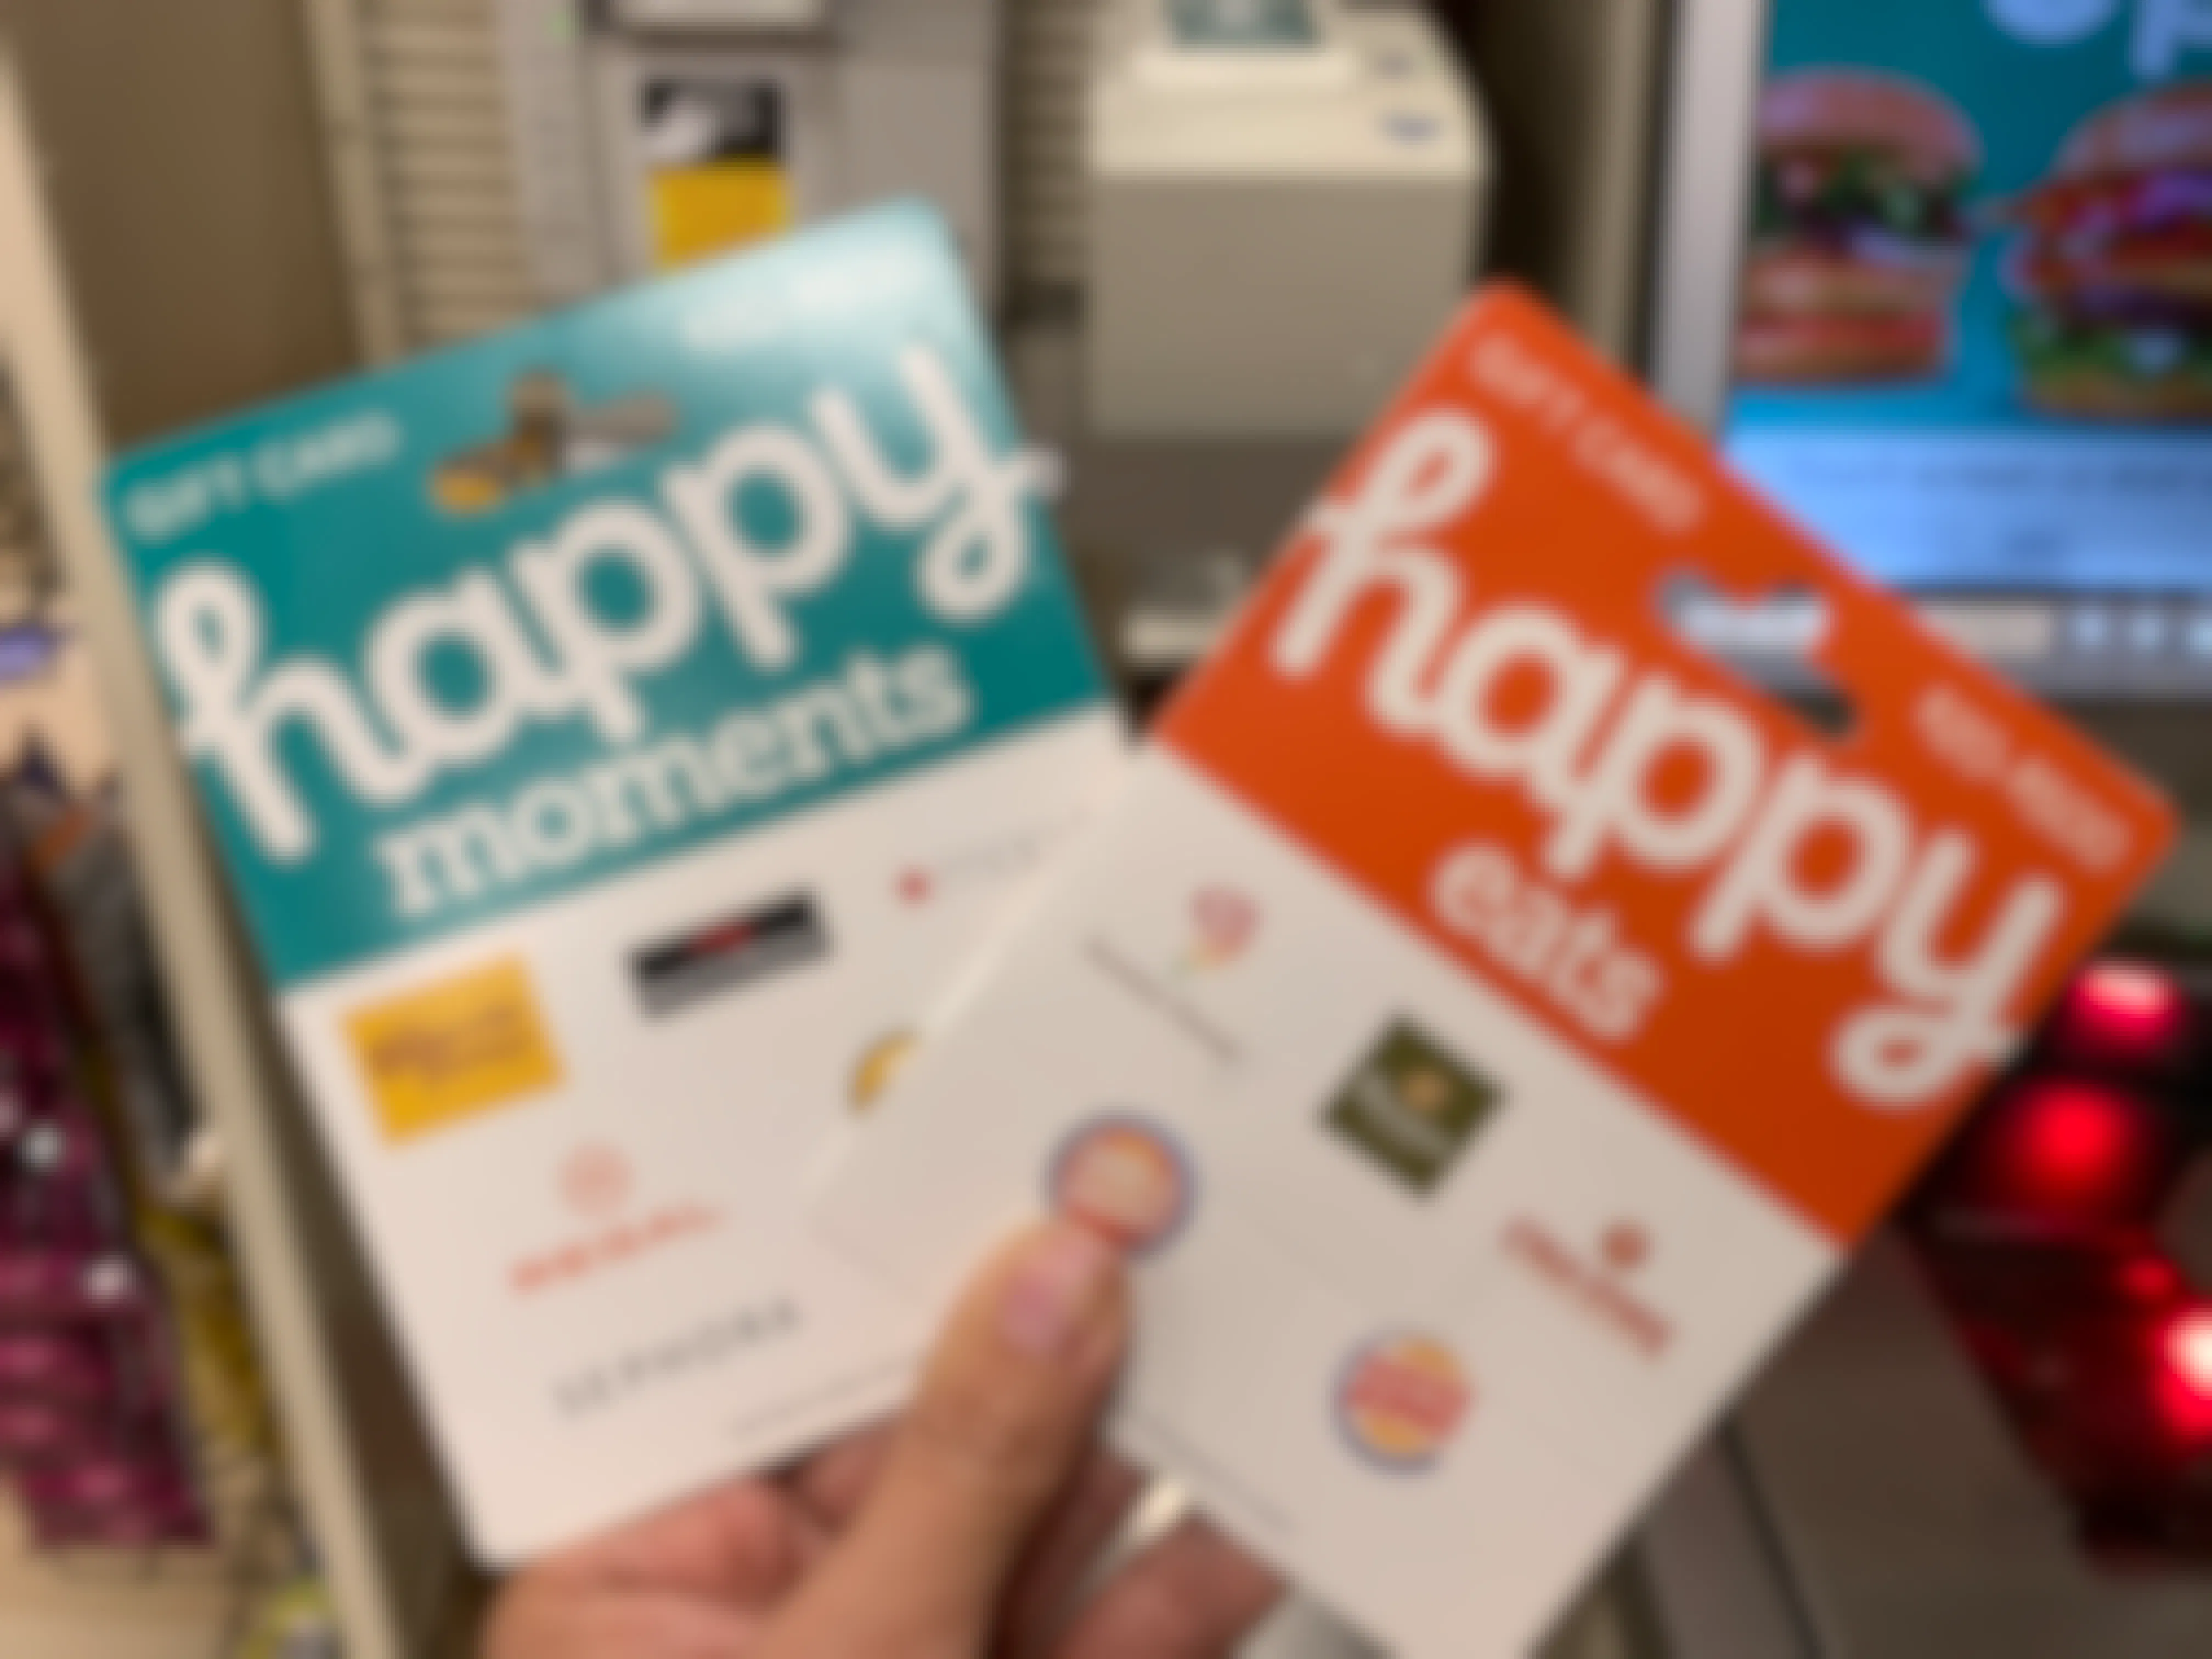 happy eats and happy moments restaurant gift cards at ralphs